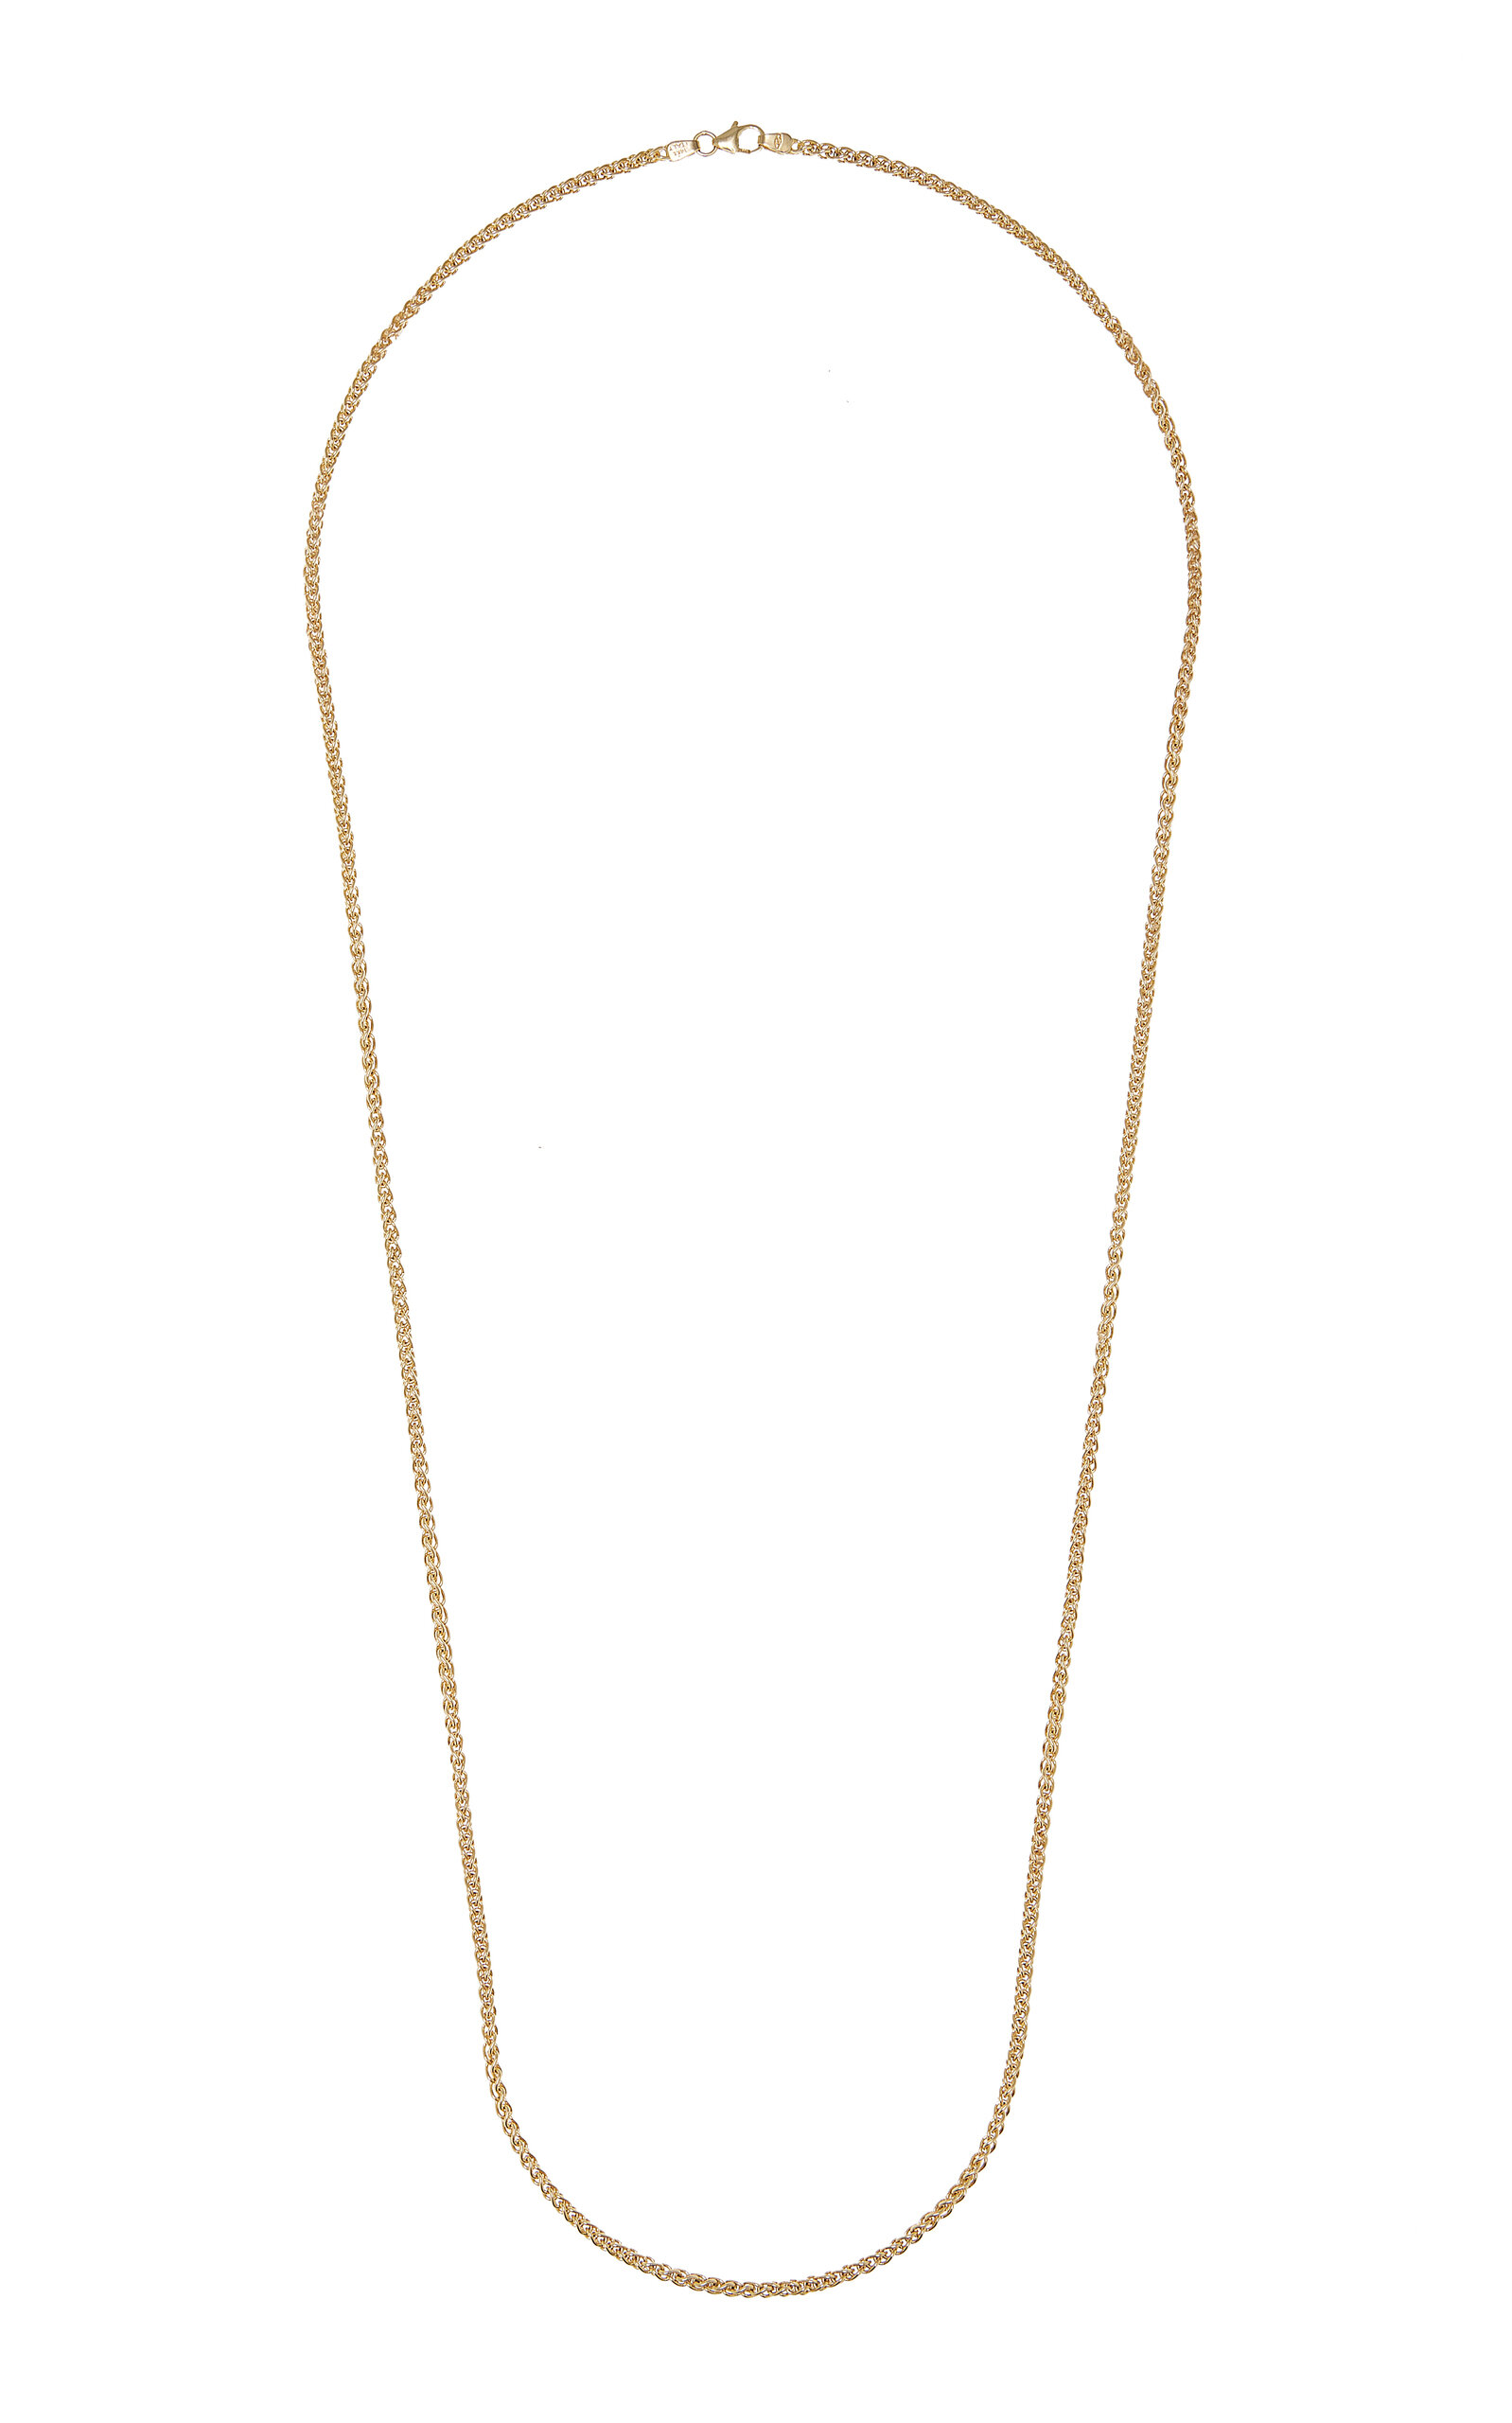 Sheryl Lowe Wheat 14k Gold Chain Necklace